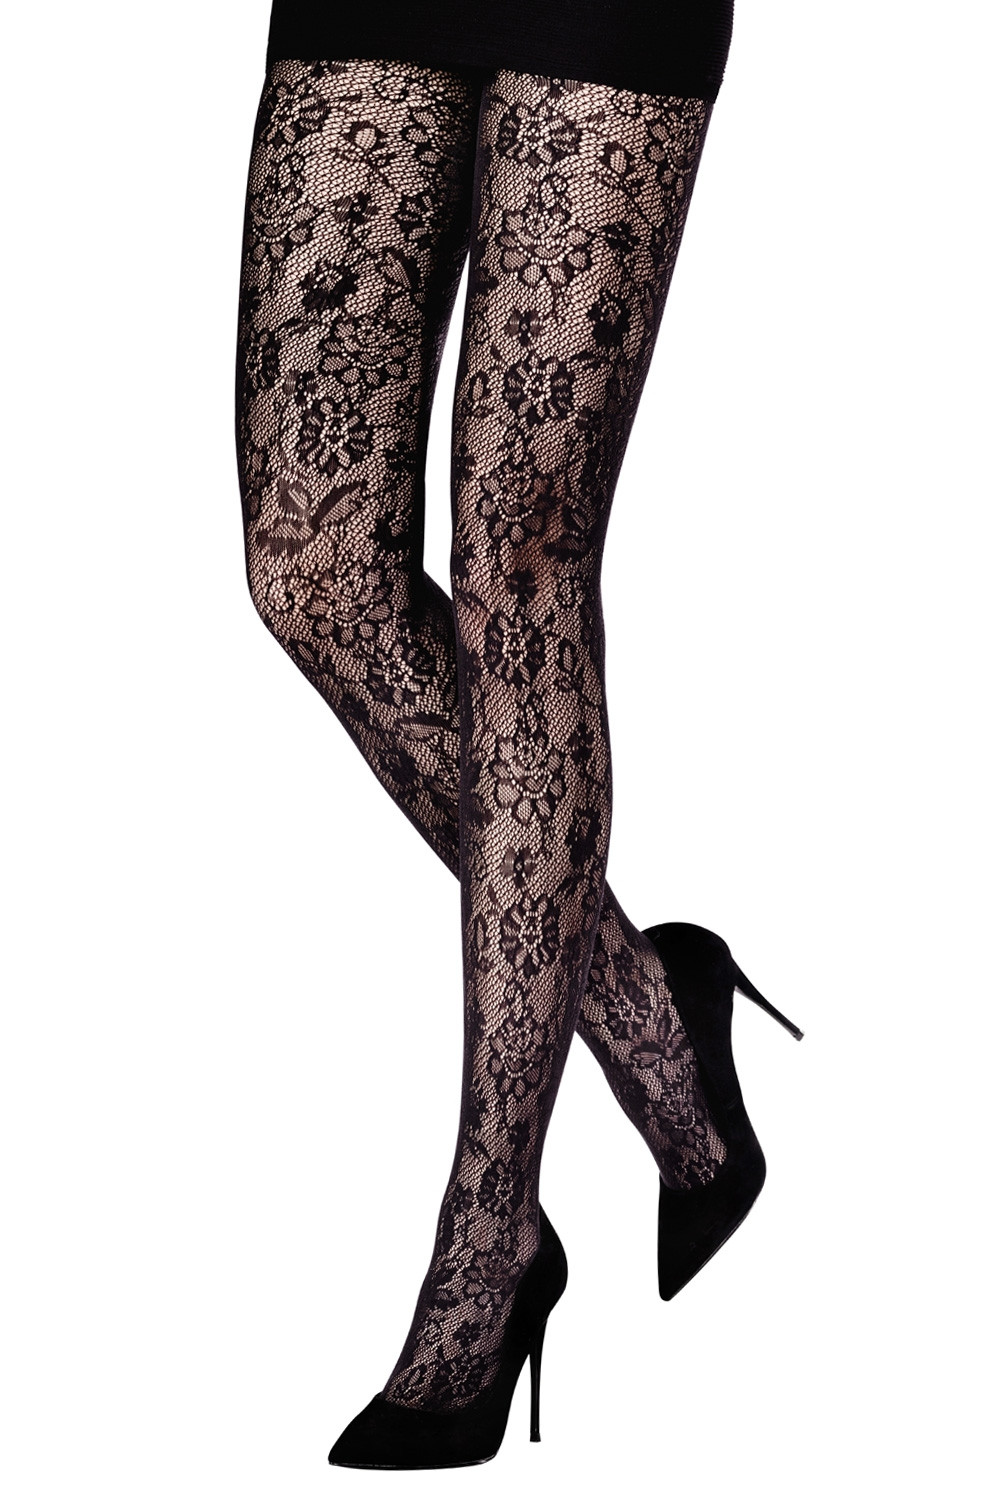 Womens Floral Vine Hipster Leggings With Lace Detailing Sexy Gothic Girls  Tights And Pantyhose In Black And White From Baldwing, $10.65 | DHgate.Com